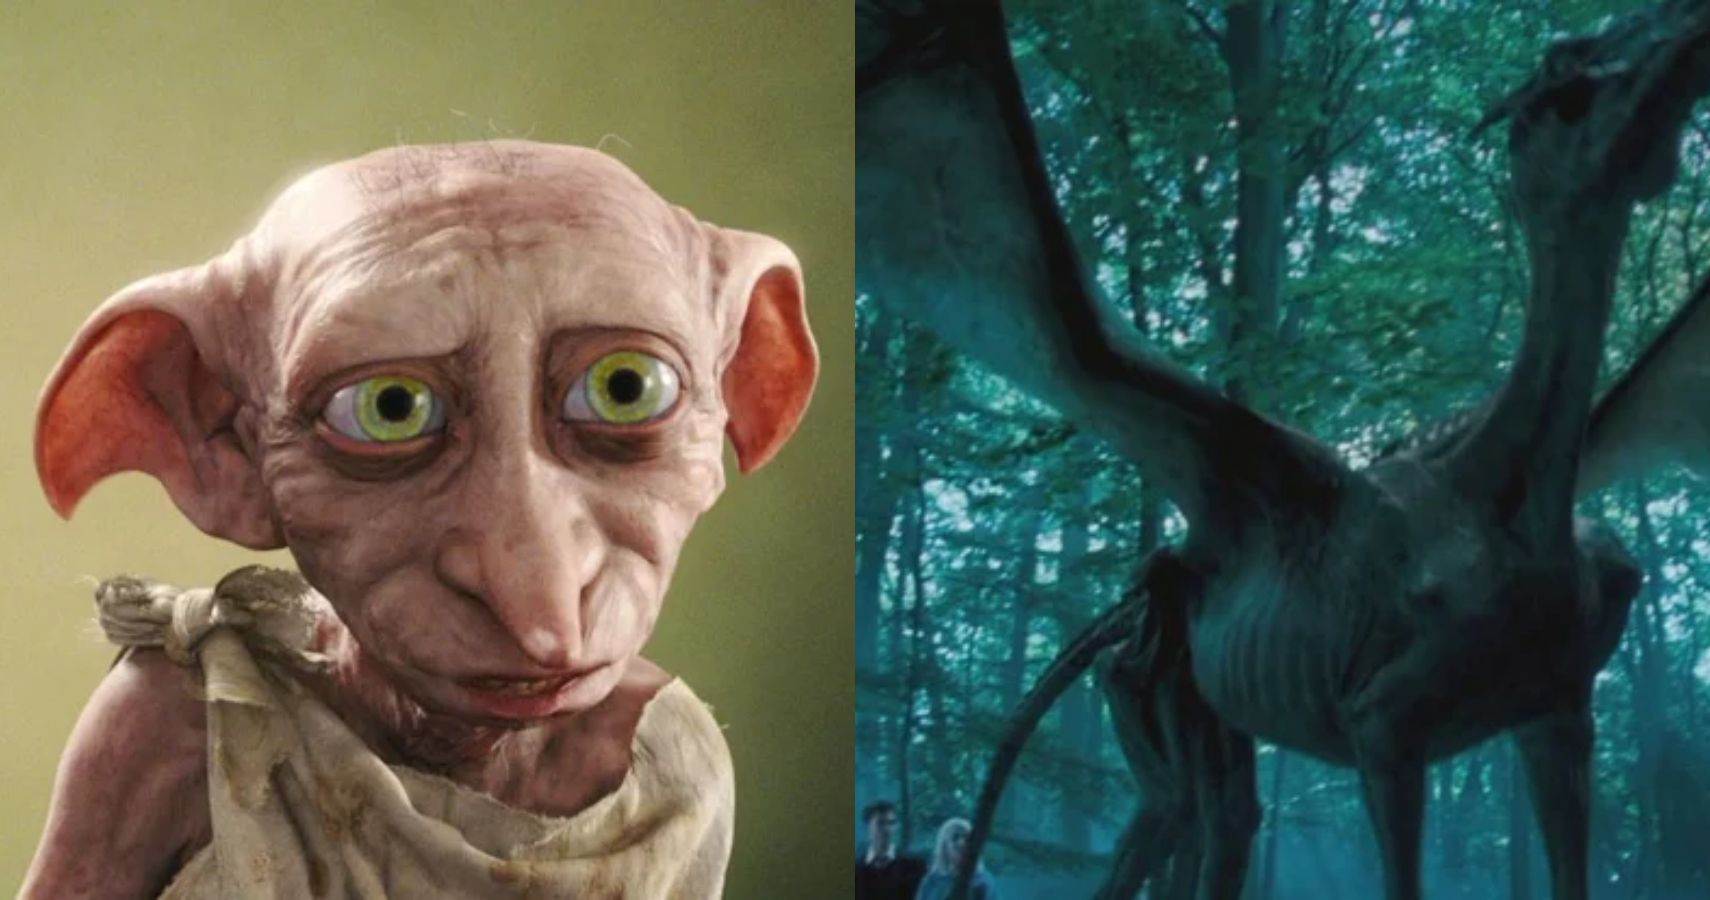 Harry Potter: 5 Creatures We'd Want As Pets (& 5 We Definitely Would Not)